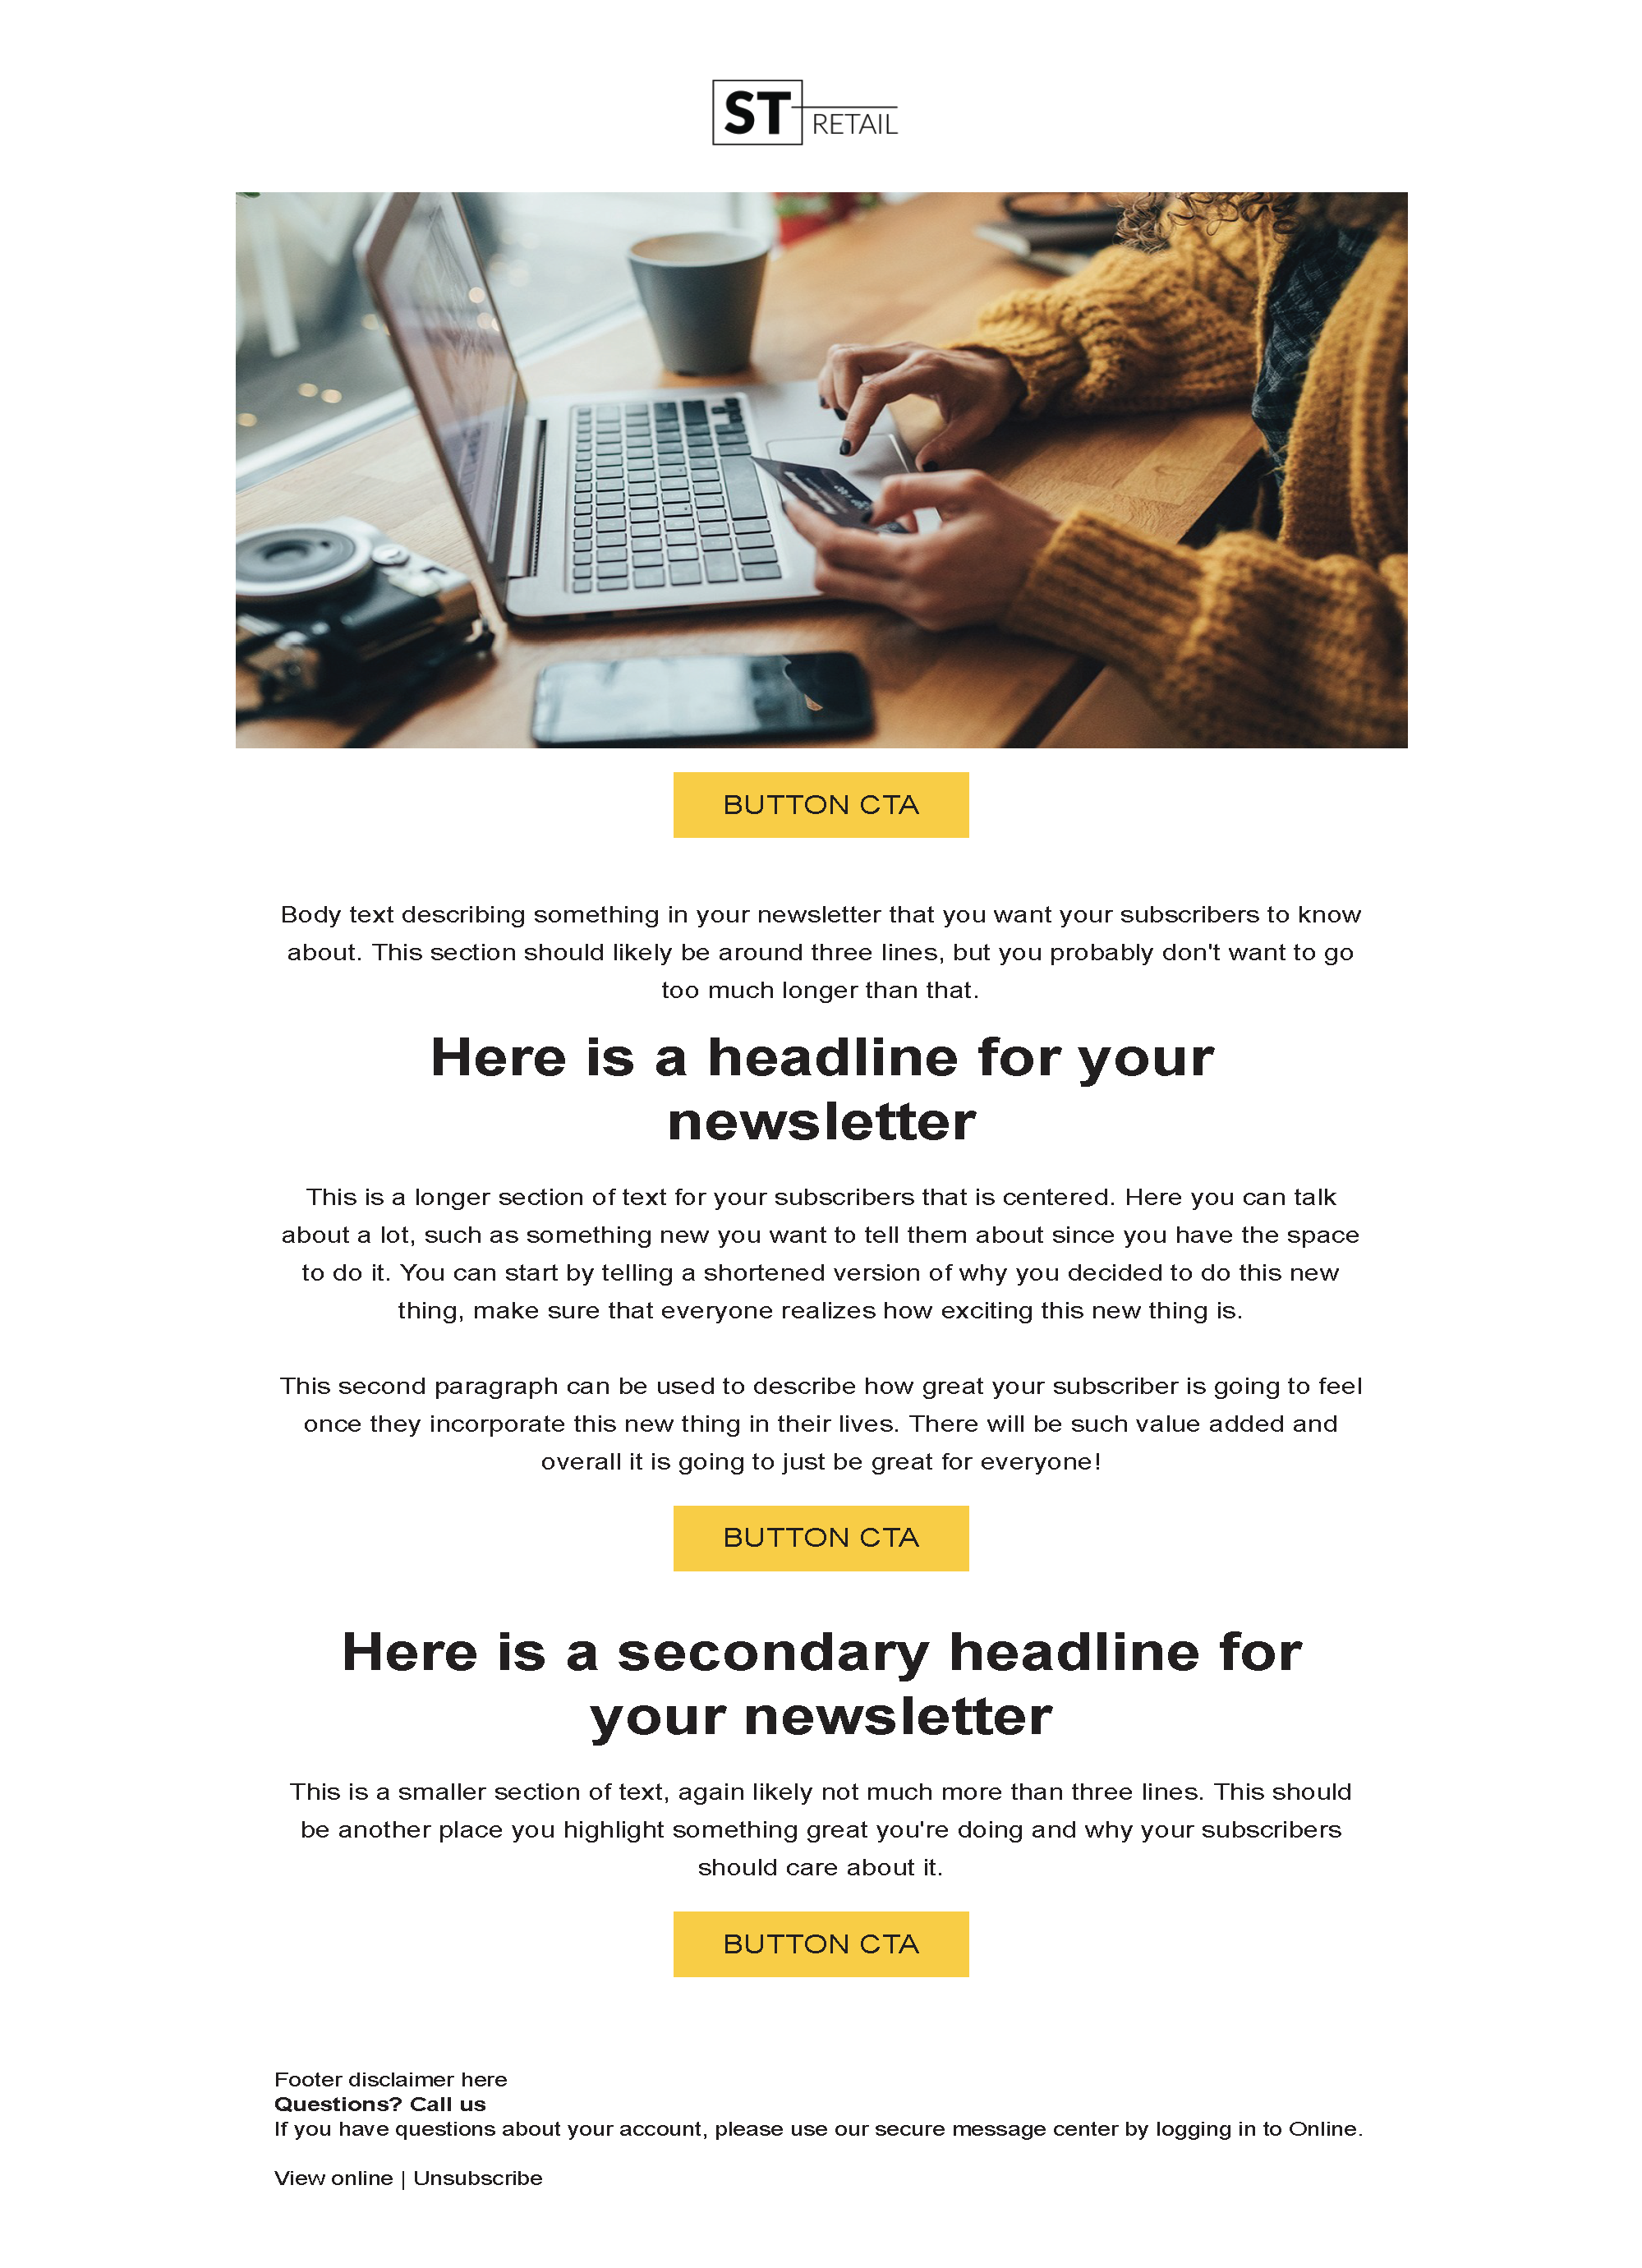 Newsletter email template 2 for retail